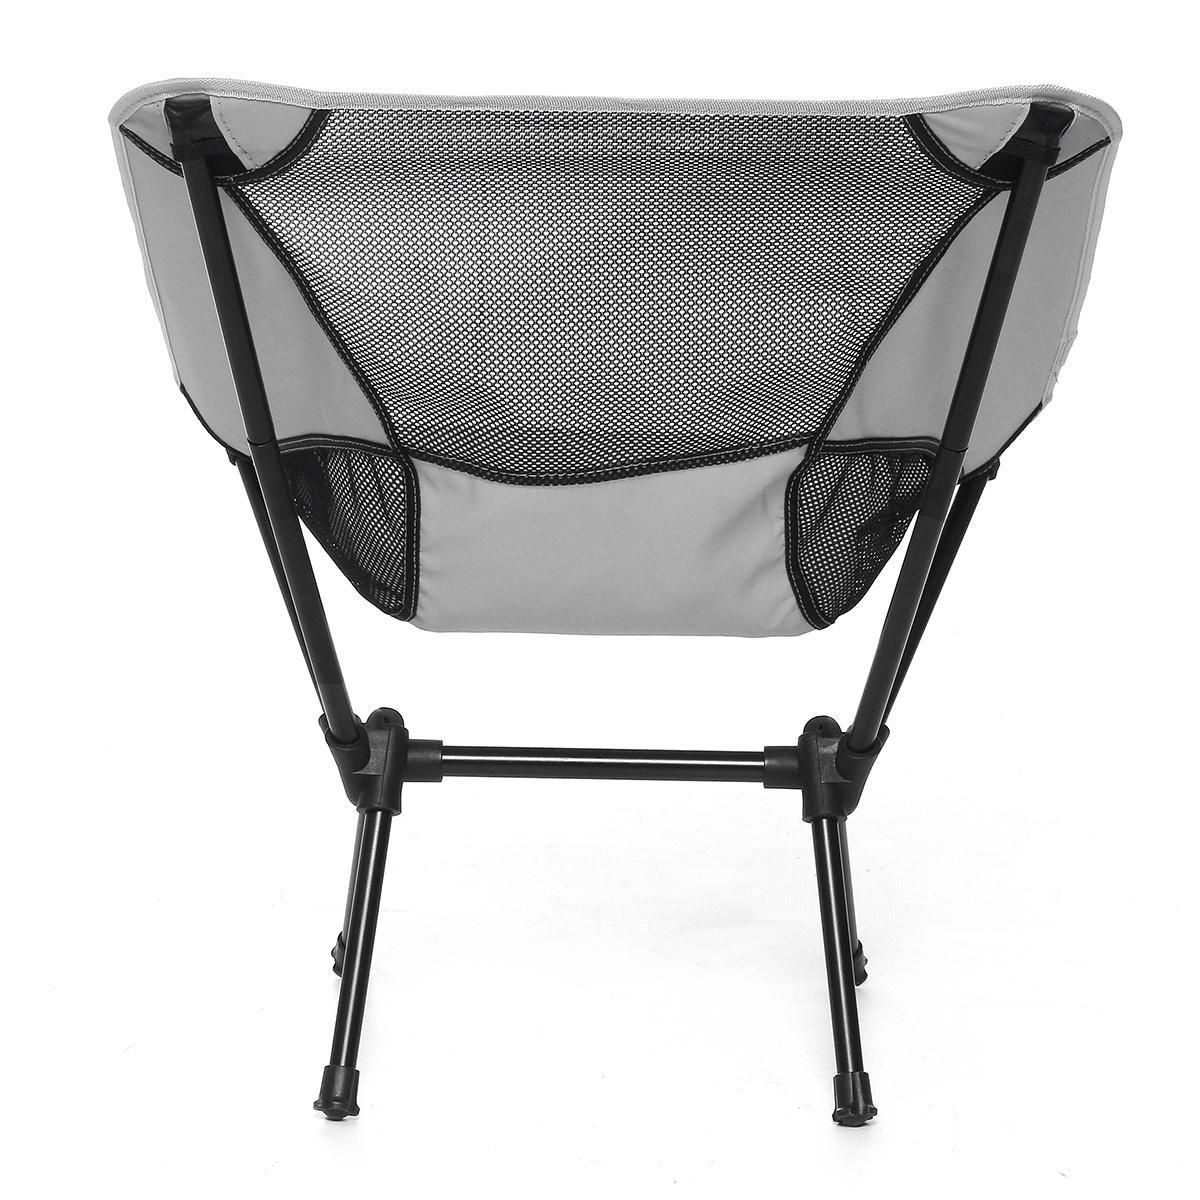 Portable Folding Fishing Chair Outdoor Foldable Camping Chair Collapsible Beach Chair